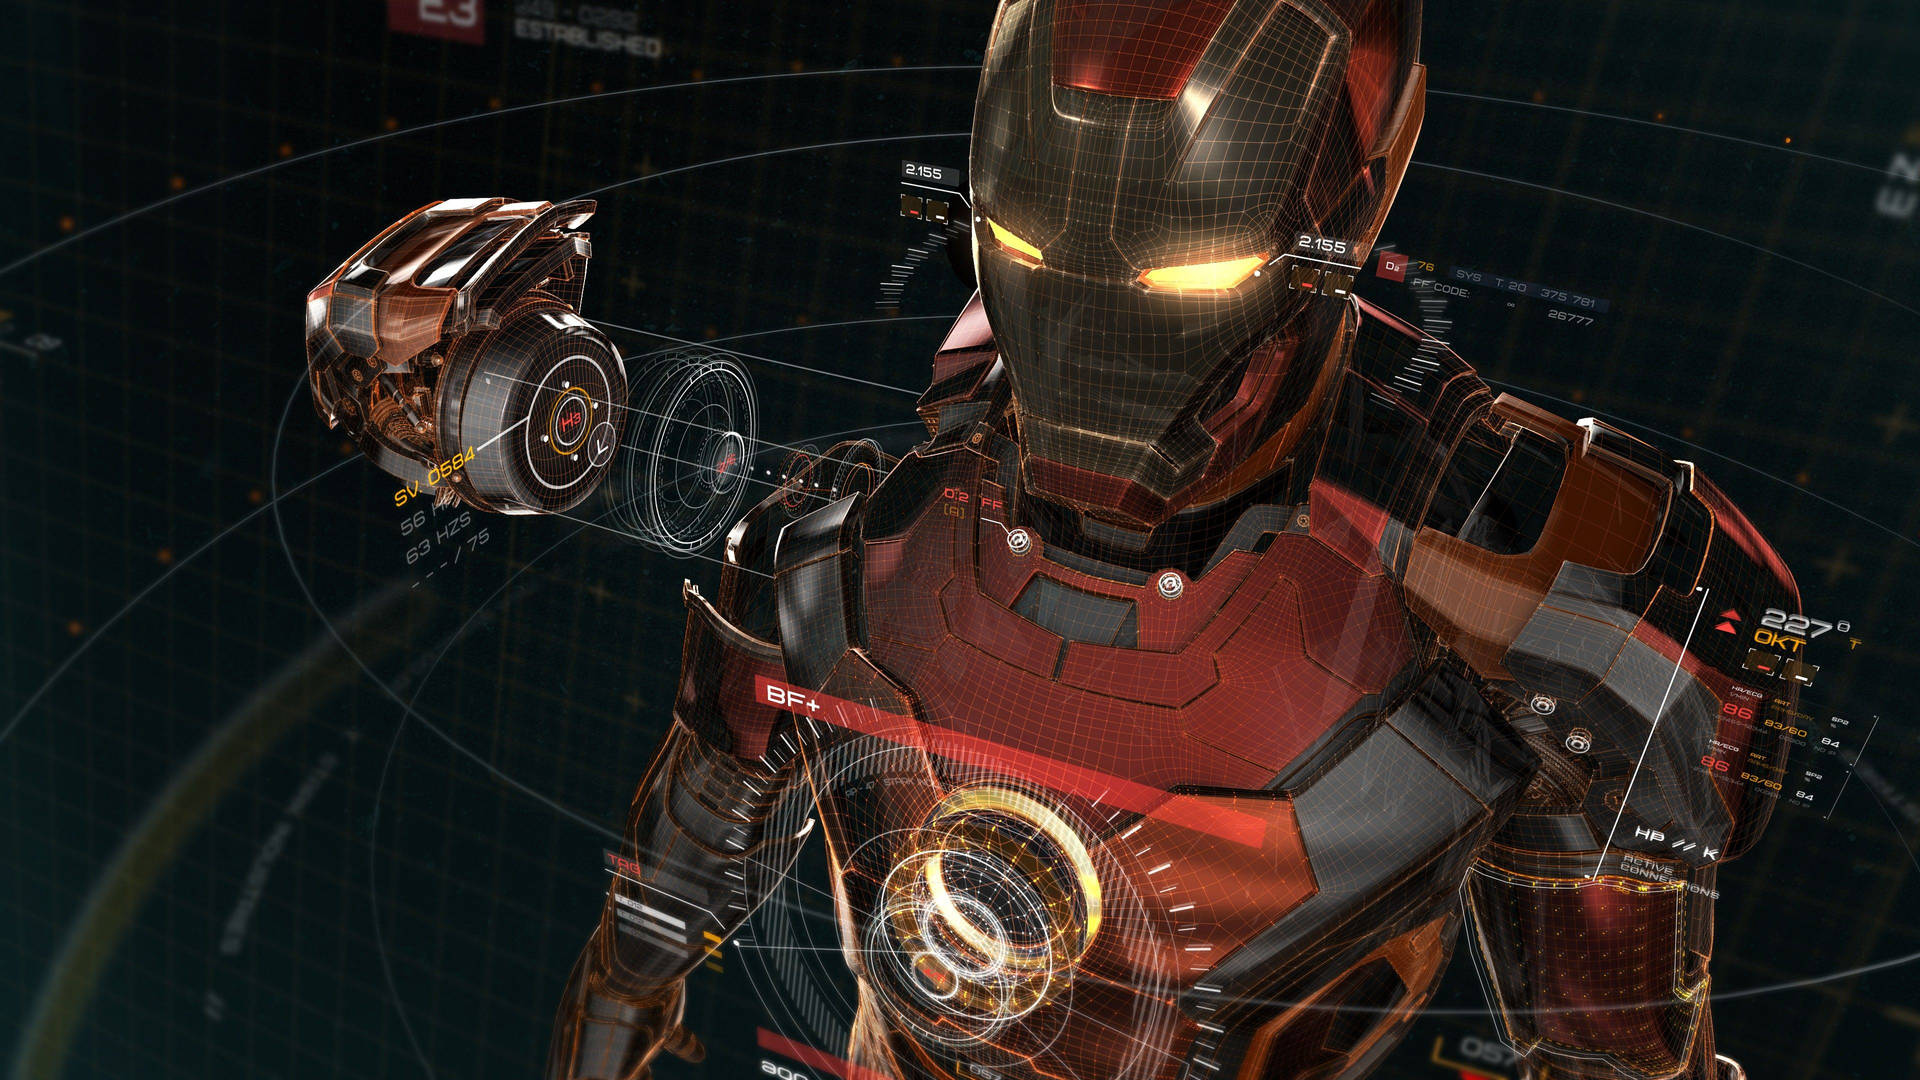 Armored Iron Man Full Hd Background